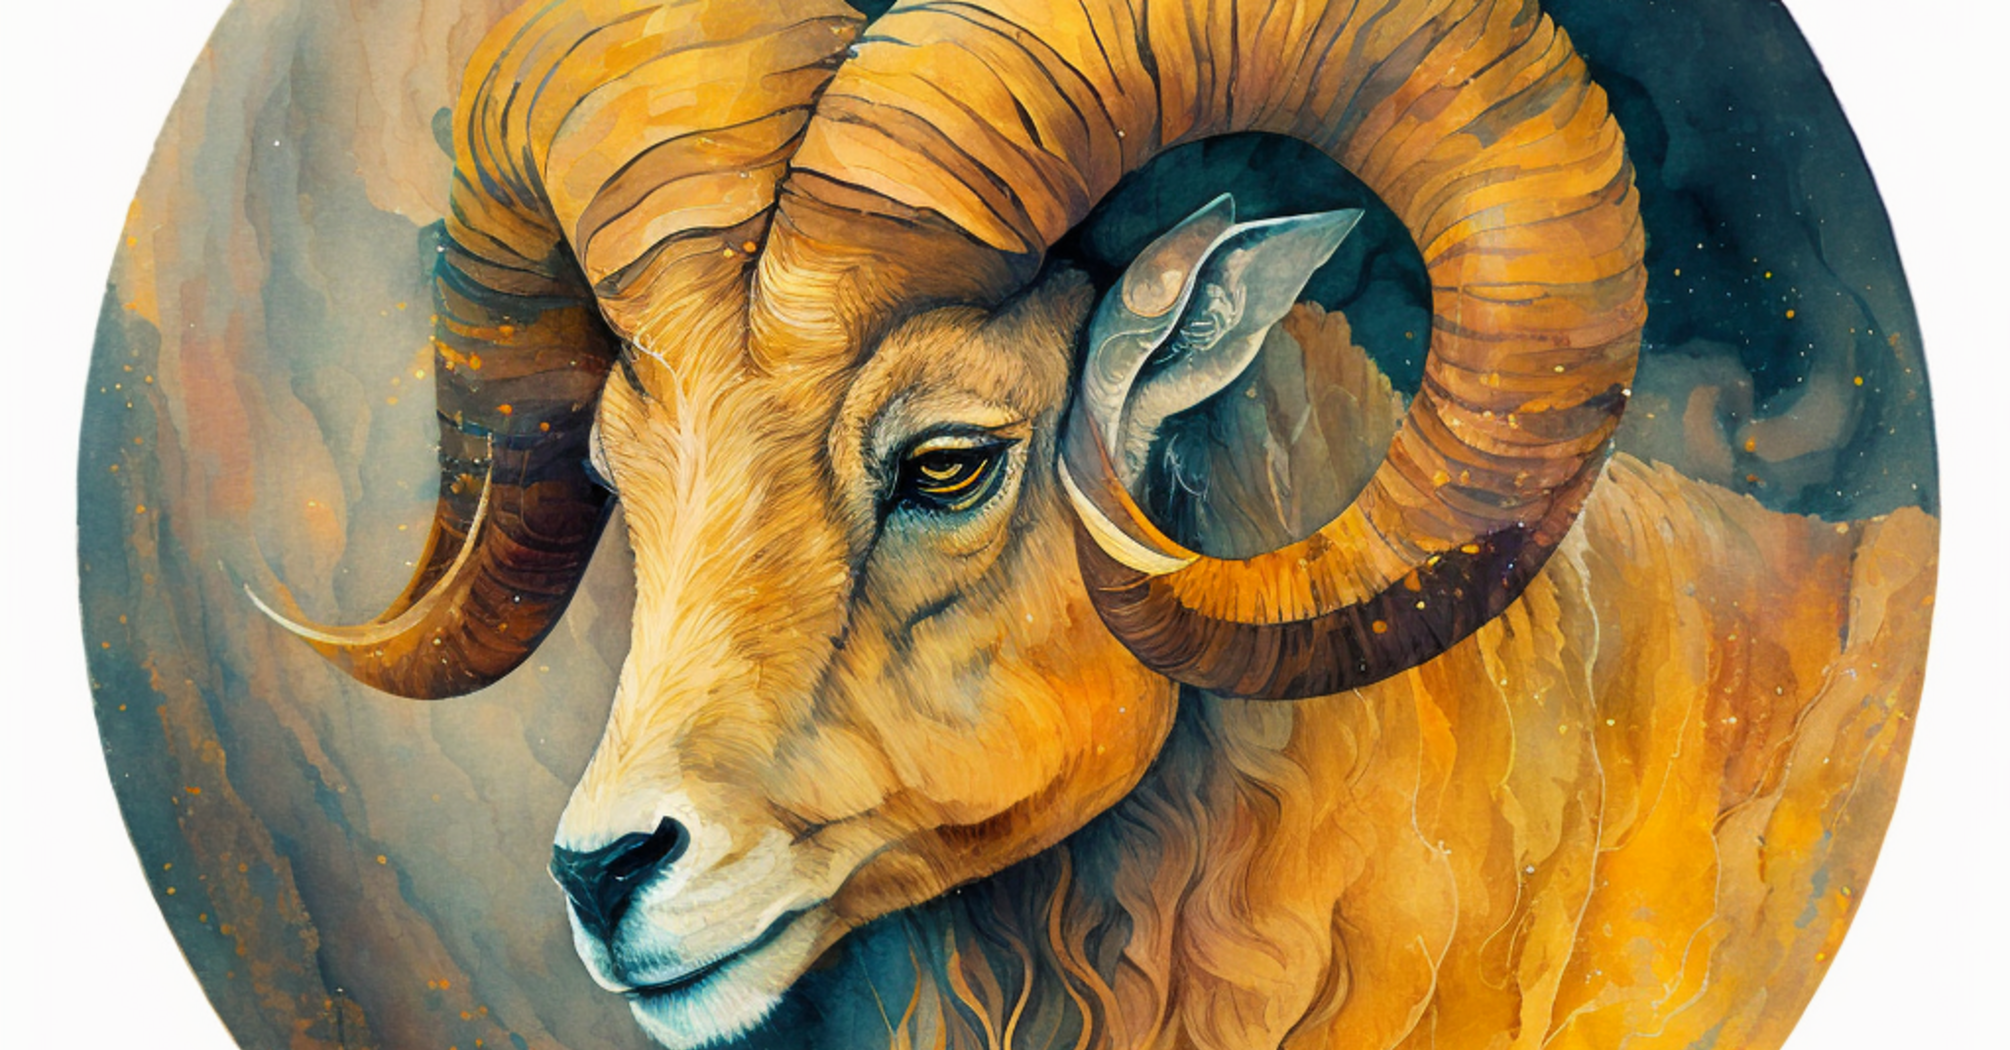 This zodiac sign will achieve great academic success: horoscope for Aries